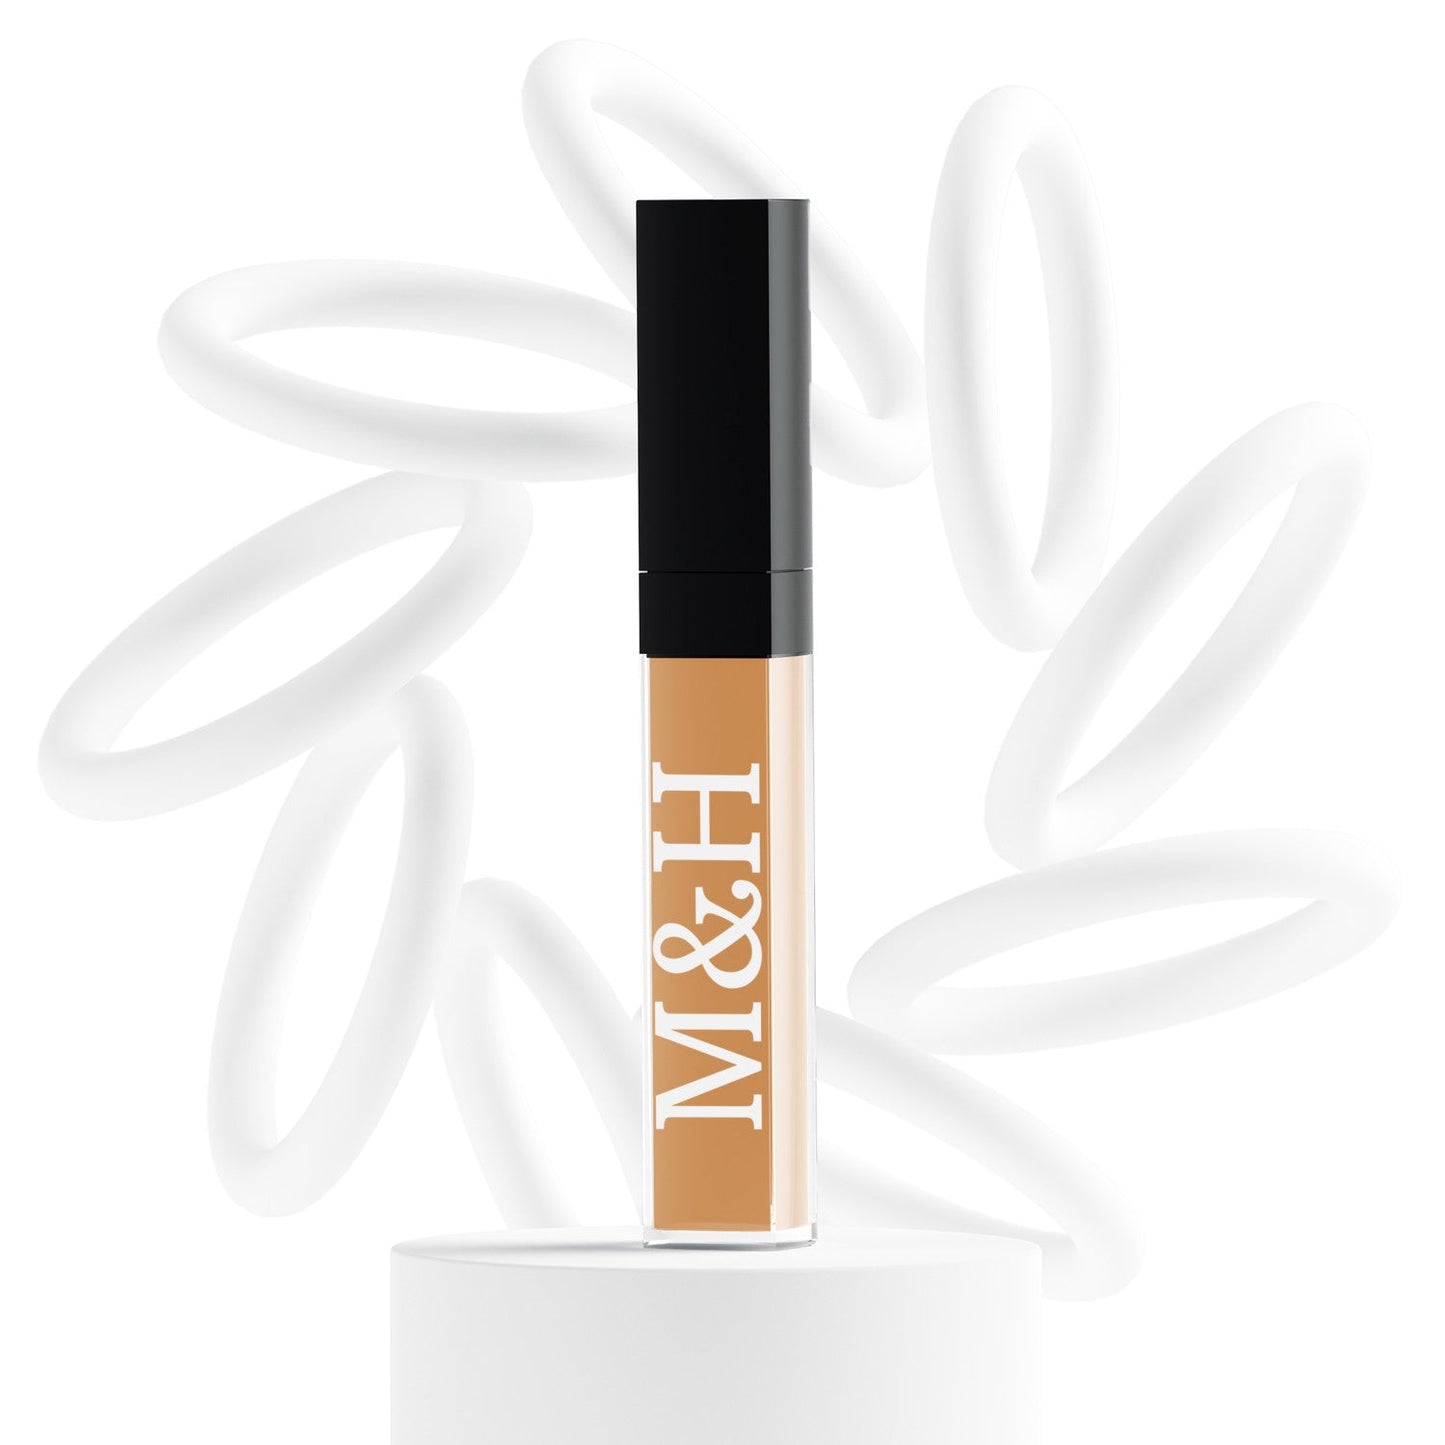 Vegan Concealers - M&H FashionVegan ConcealersconcealerM&H FashionM&H FashionConcealer-904Dark TanVegan ConcealersM&H FashionconcealerM&H Fashion This multifunctional concealer is designed to cover under-eye circles, complexion alterations, and major imperfections like scars, hyperpigmentation, burns, and tatVegan Concealers